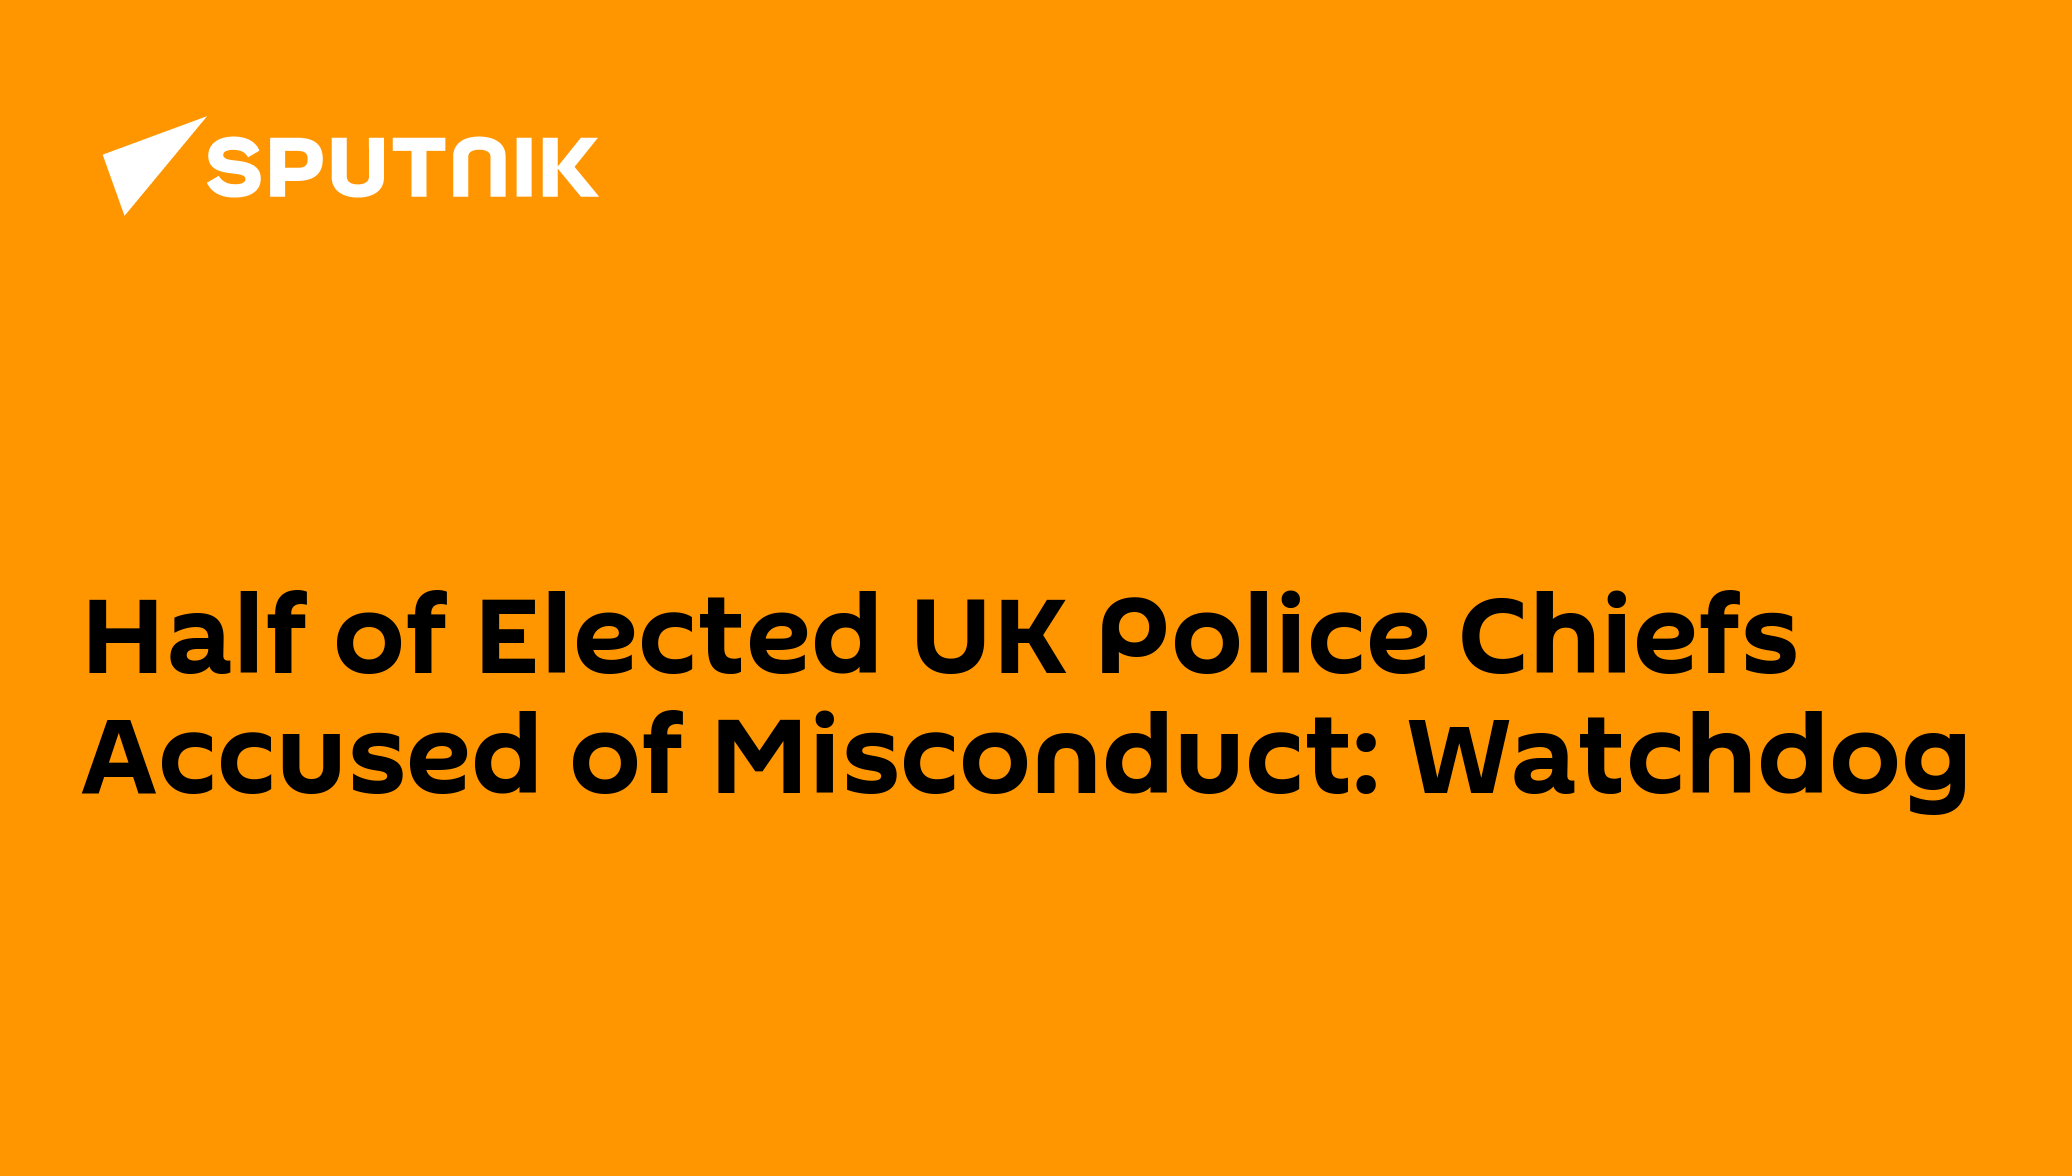 half-of-elected-uk-police-chiefs-accused-of-misconduct-watchdog-01